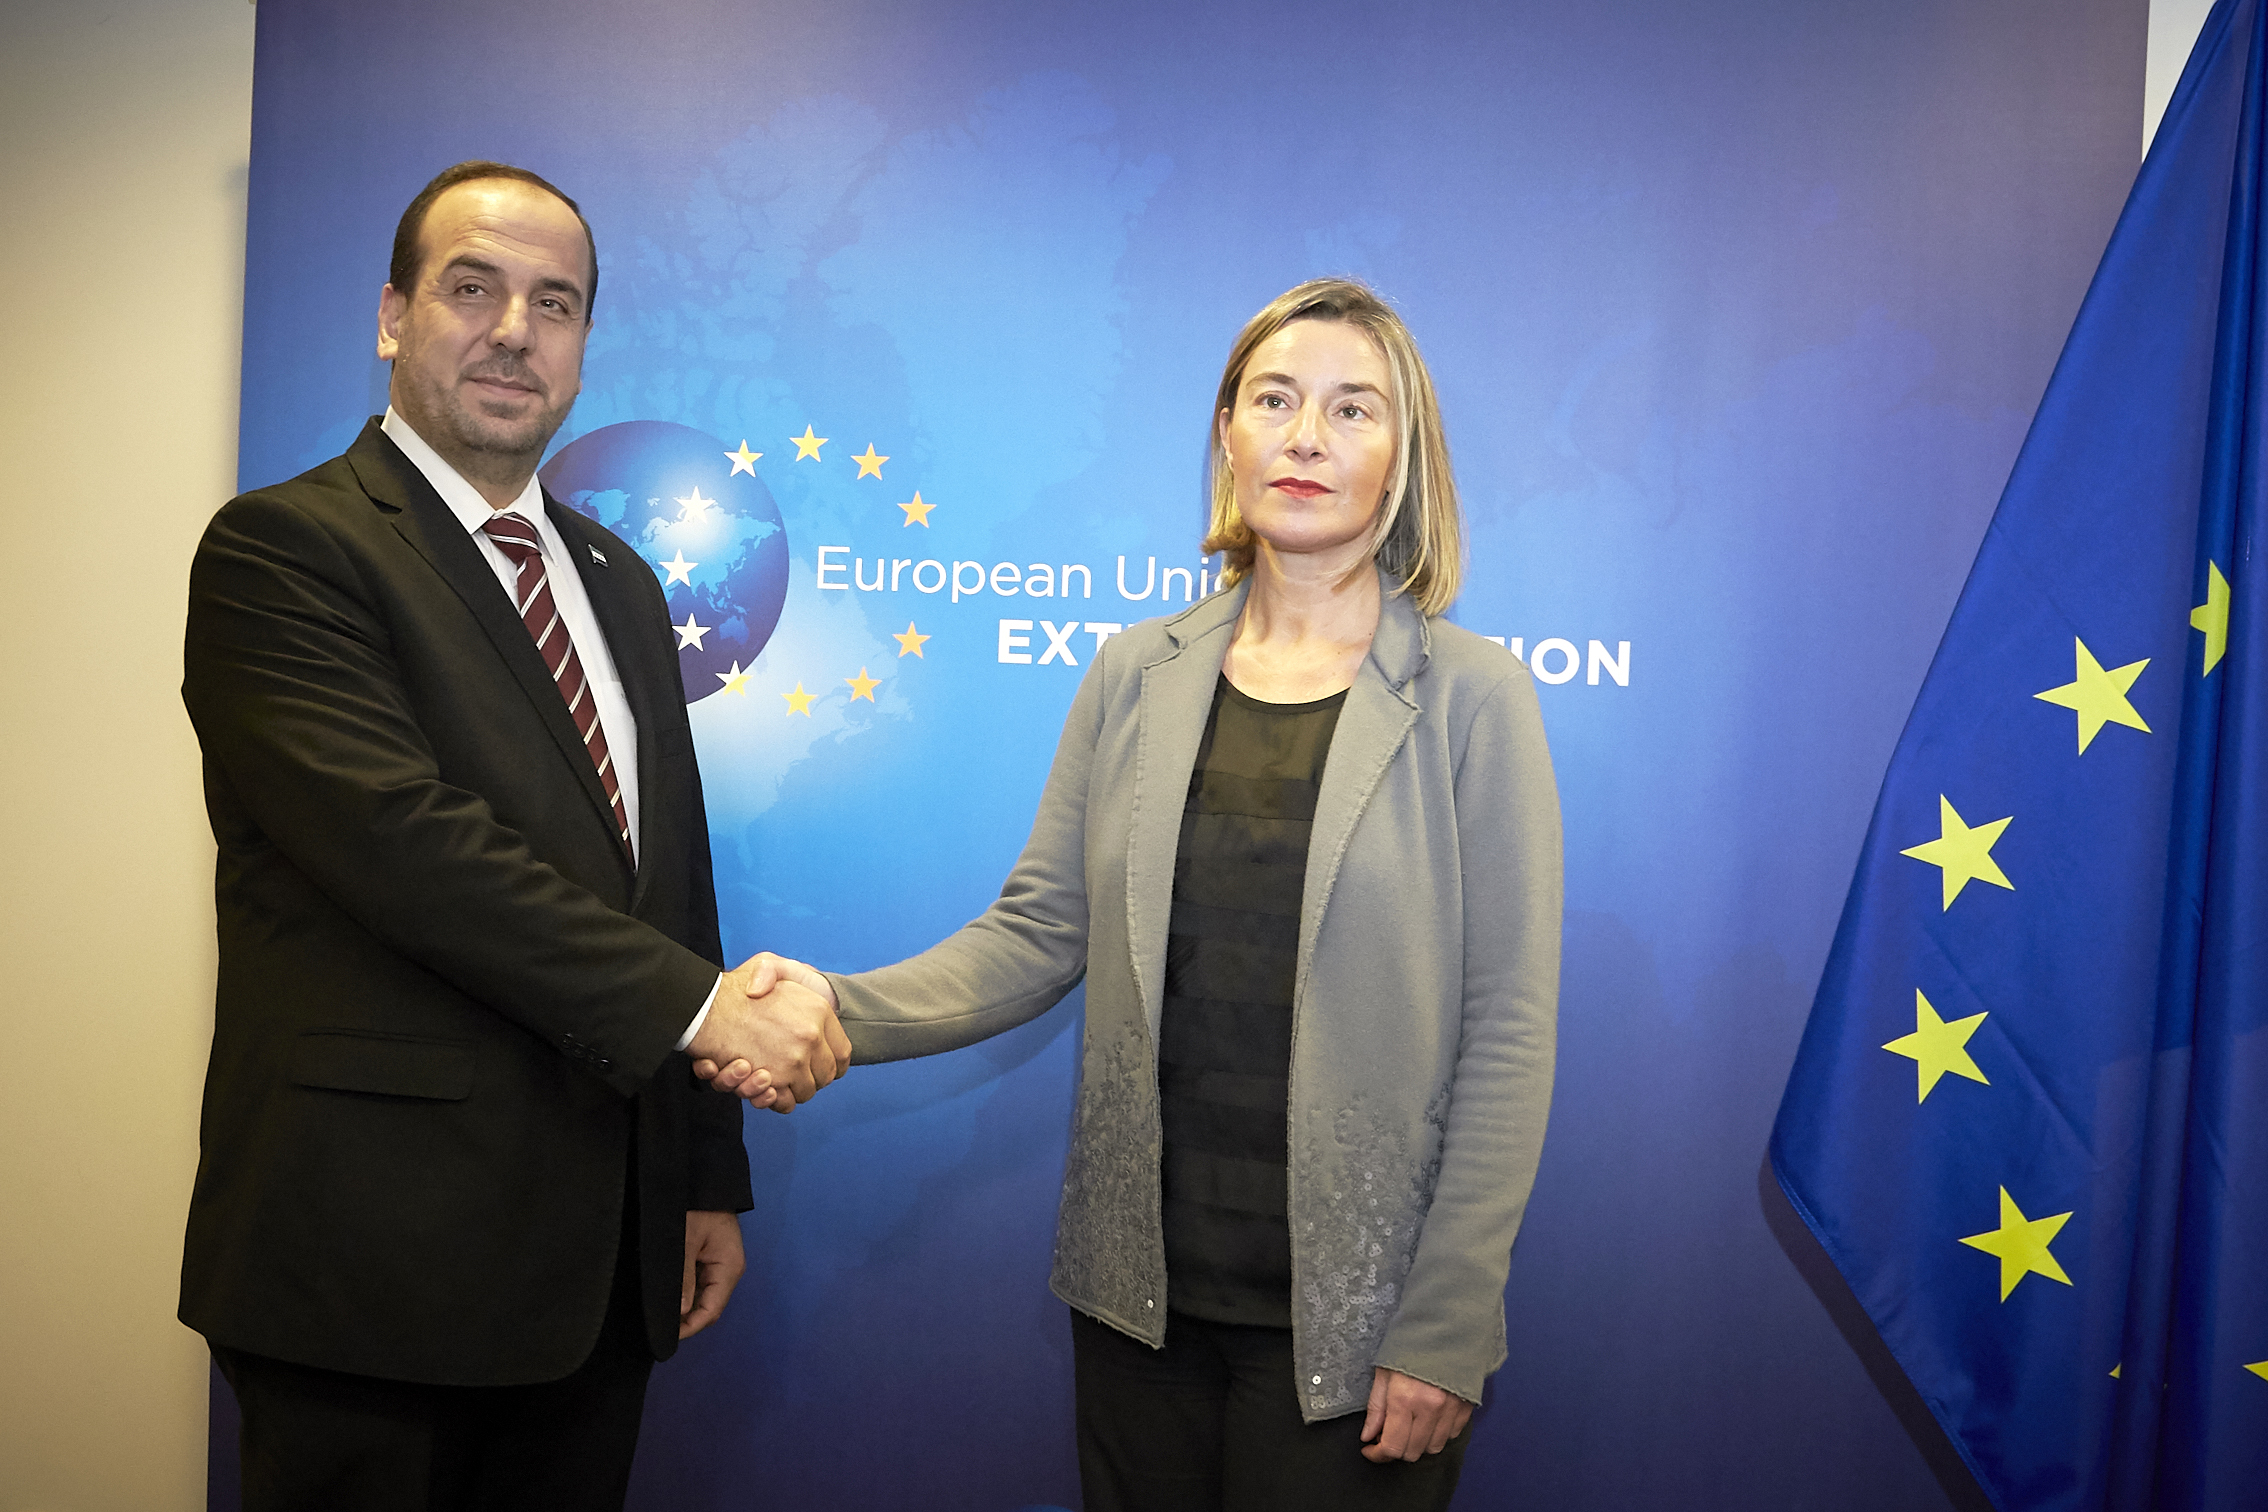 EU High Representative Federica Mogherini with Dr. Nasr Al-Hariri, the general coordinator and head of the negotiating team of the Syrian Negotiation Commission (SNC)